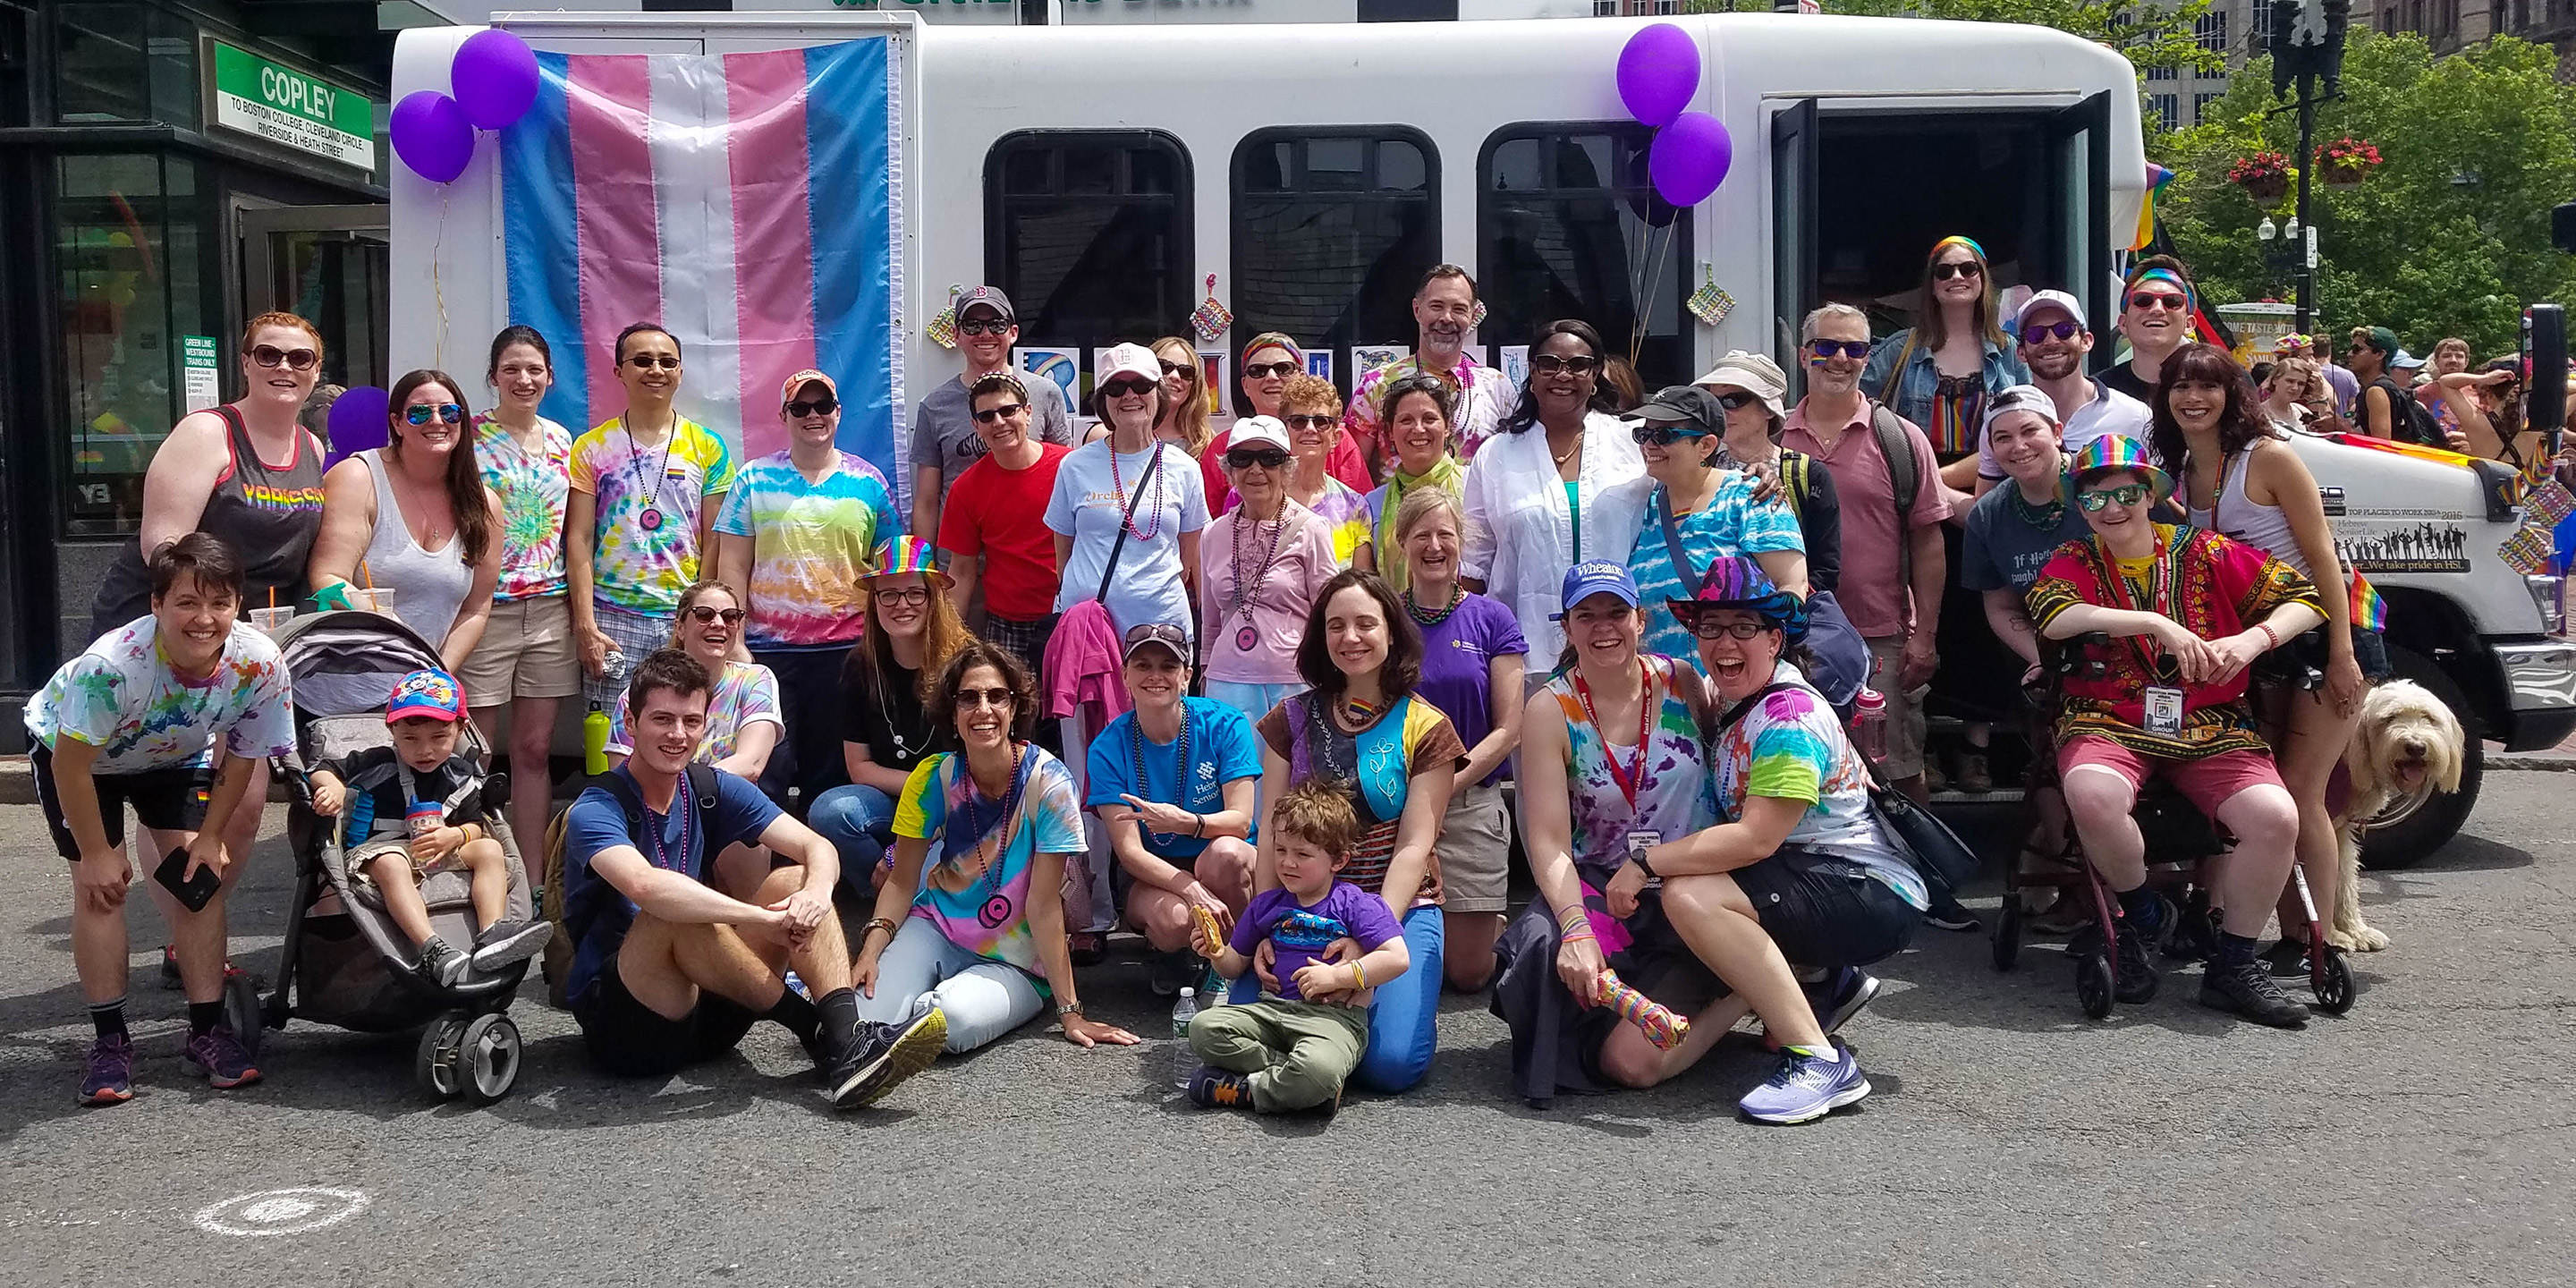 A group of HSL employees and residents stand in front of a bus at the Boston Pride Parade 